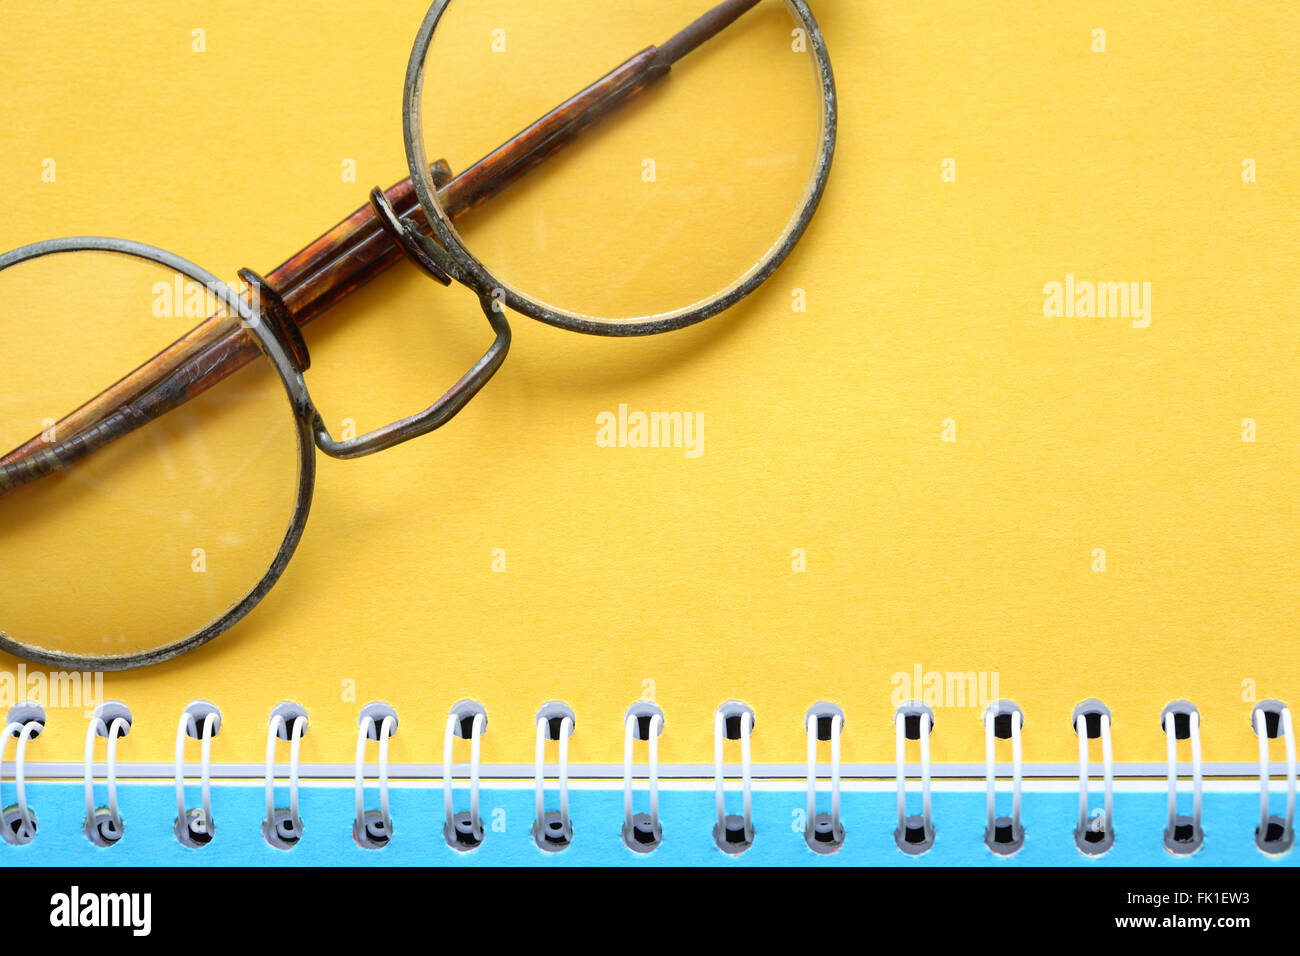 Old vintage spectacles on open notebook with colored pages Stock Photo